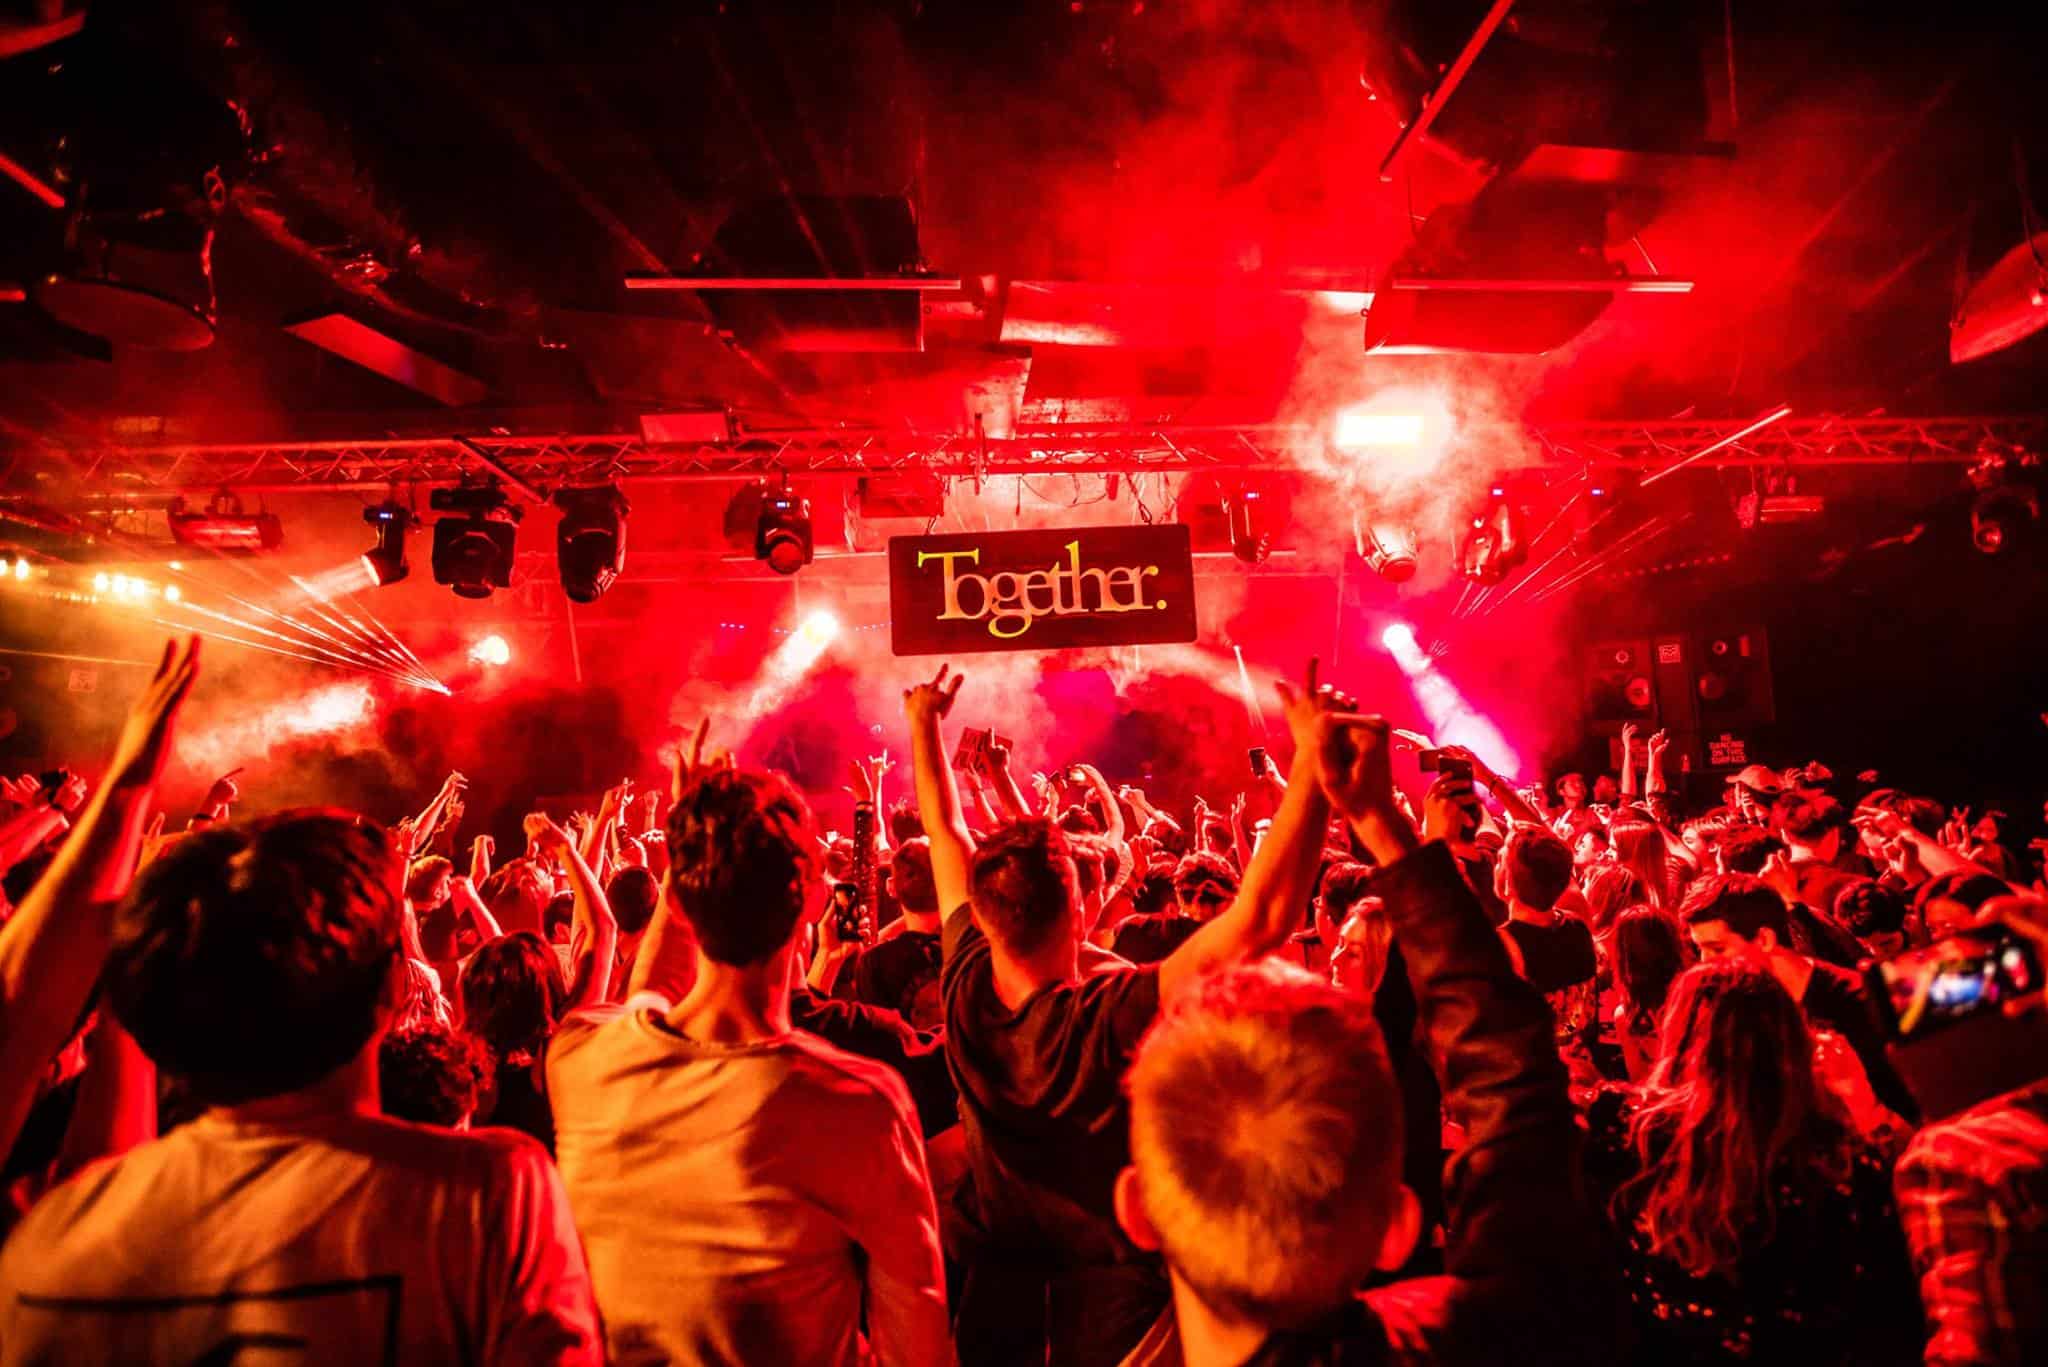 The other side: 26% of British people want to permanently close nightclubs